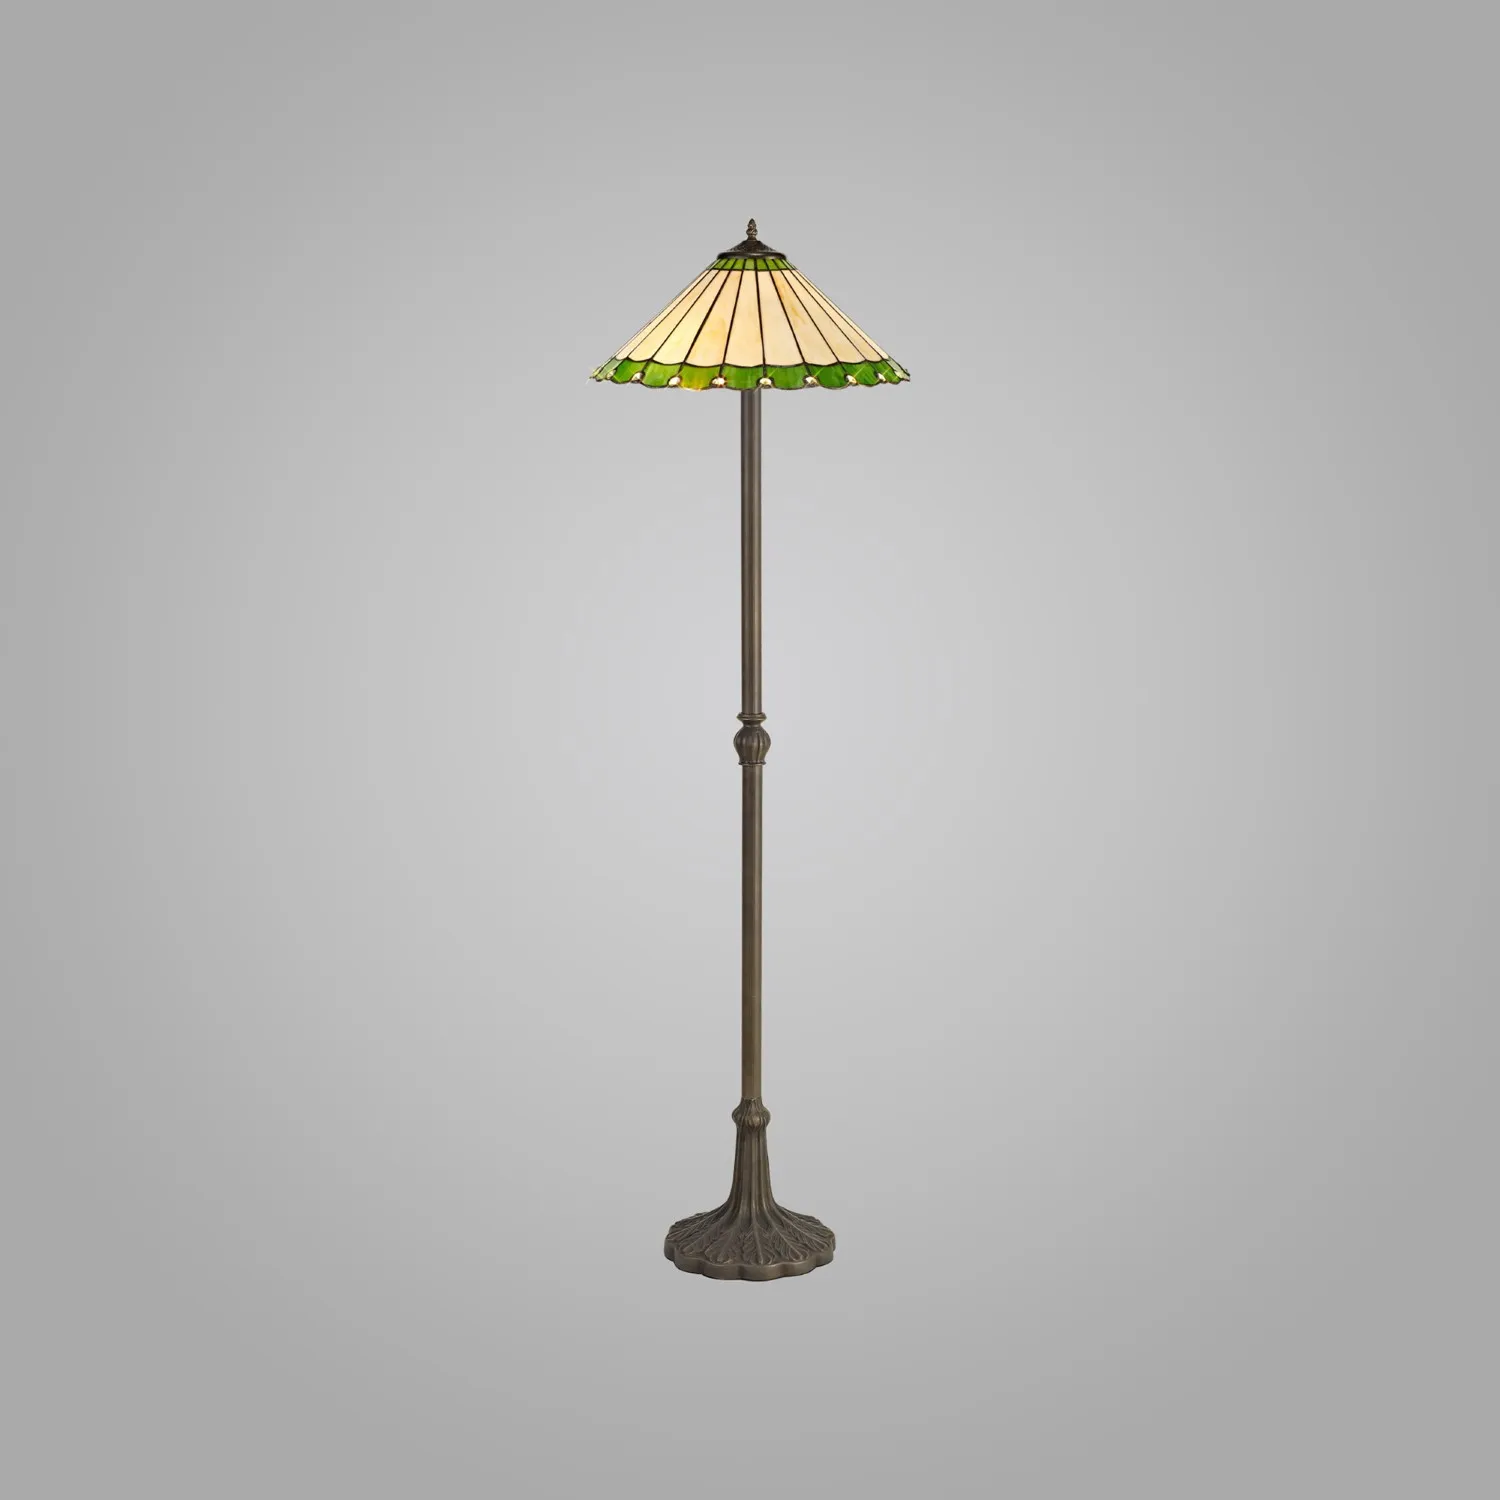 Ware 2 Light Leaf Design Floor Lamp E27 With 40cm Tiffany Shade, Green Cream Crystal Aged Antique Brass